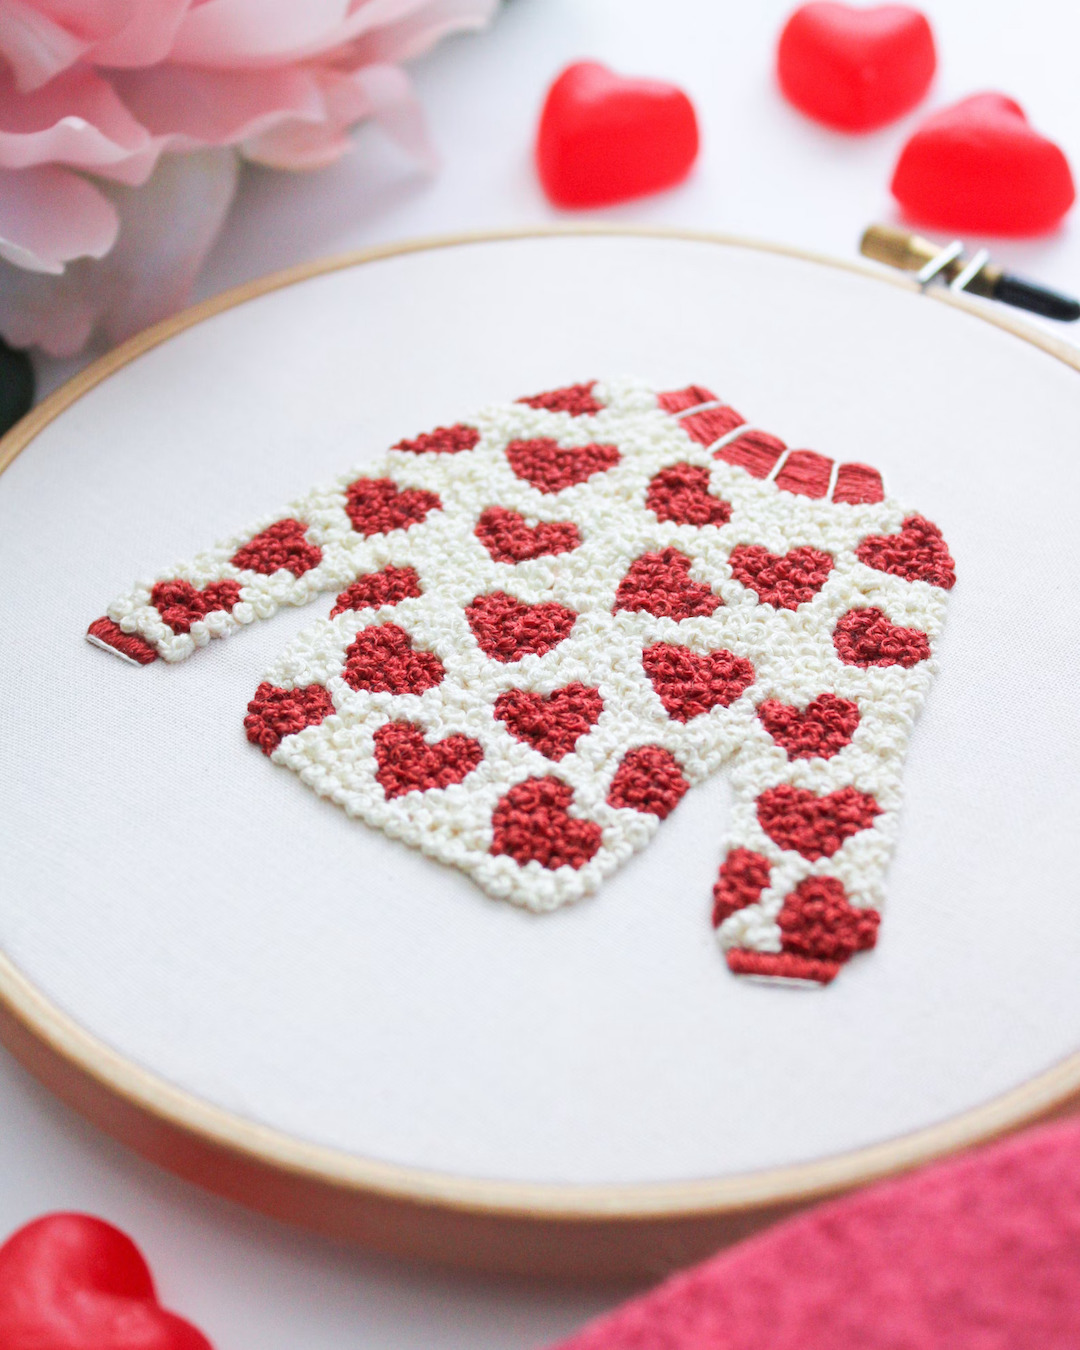 Embroidery pattern to celebrate Galentine's Day